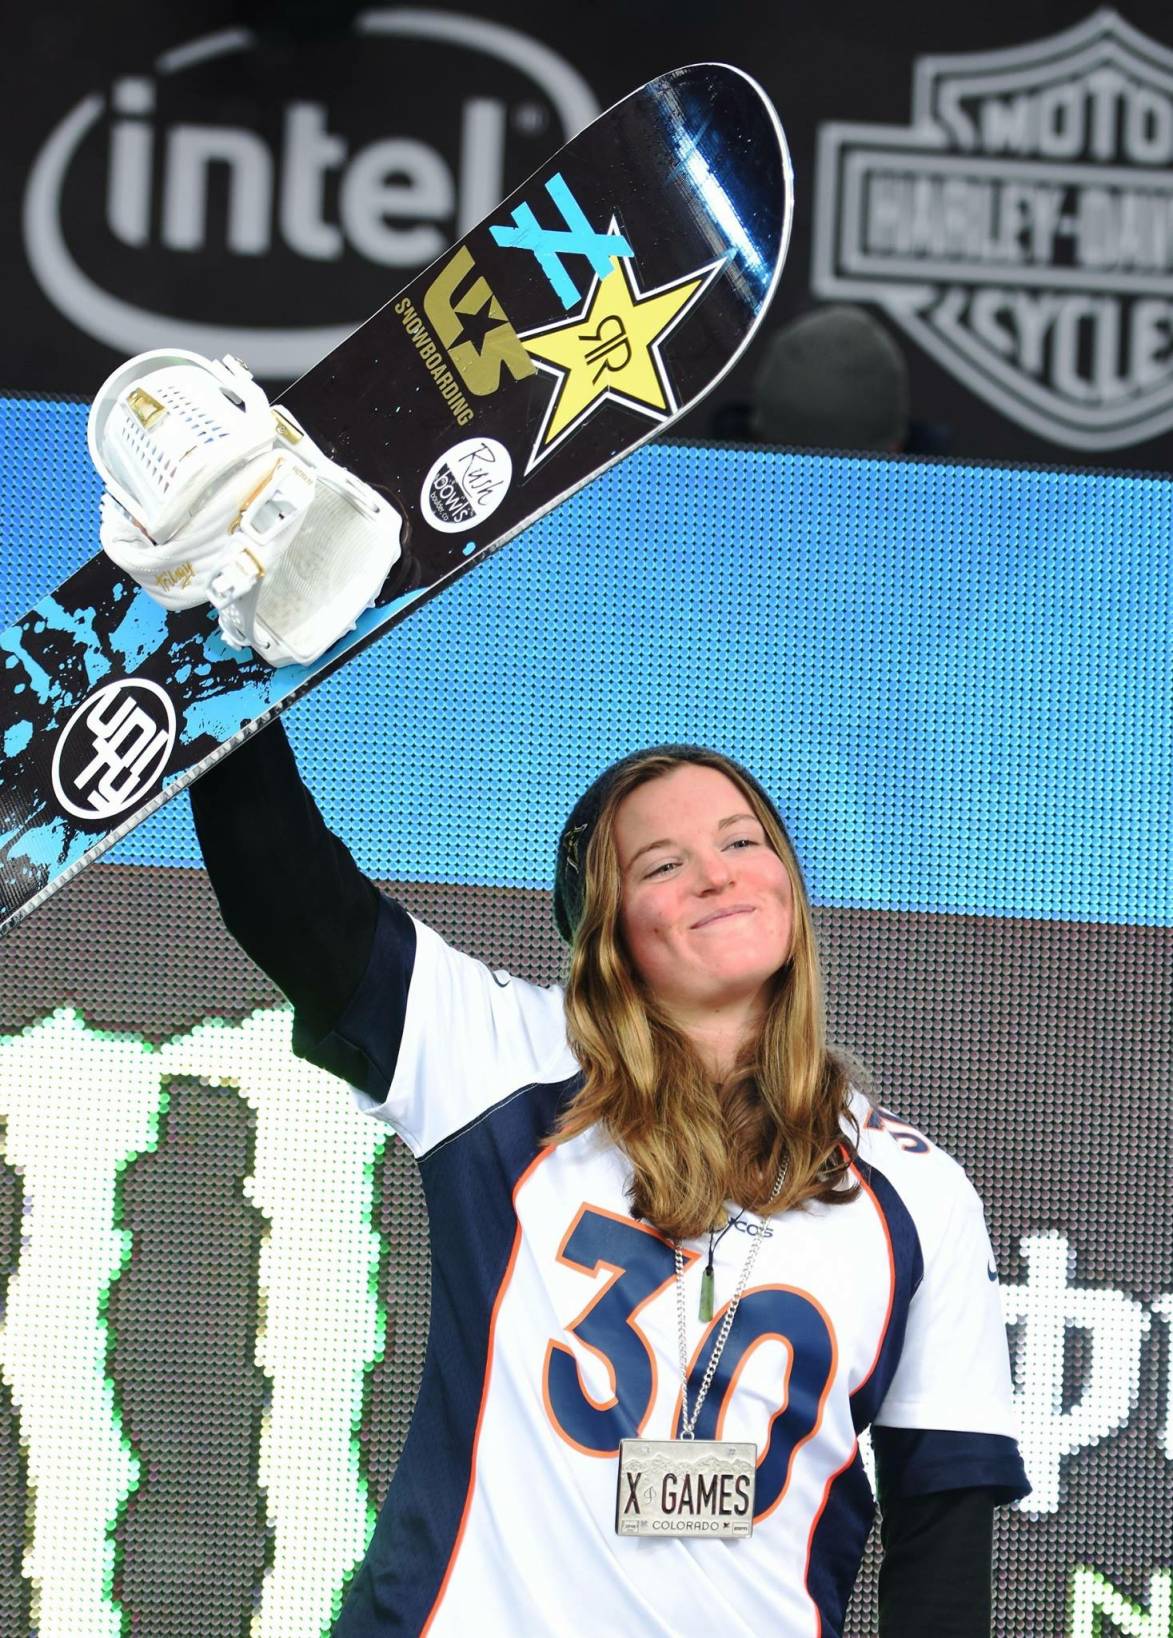 Arielle Gold at the X Games